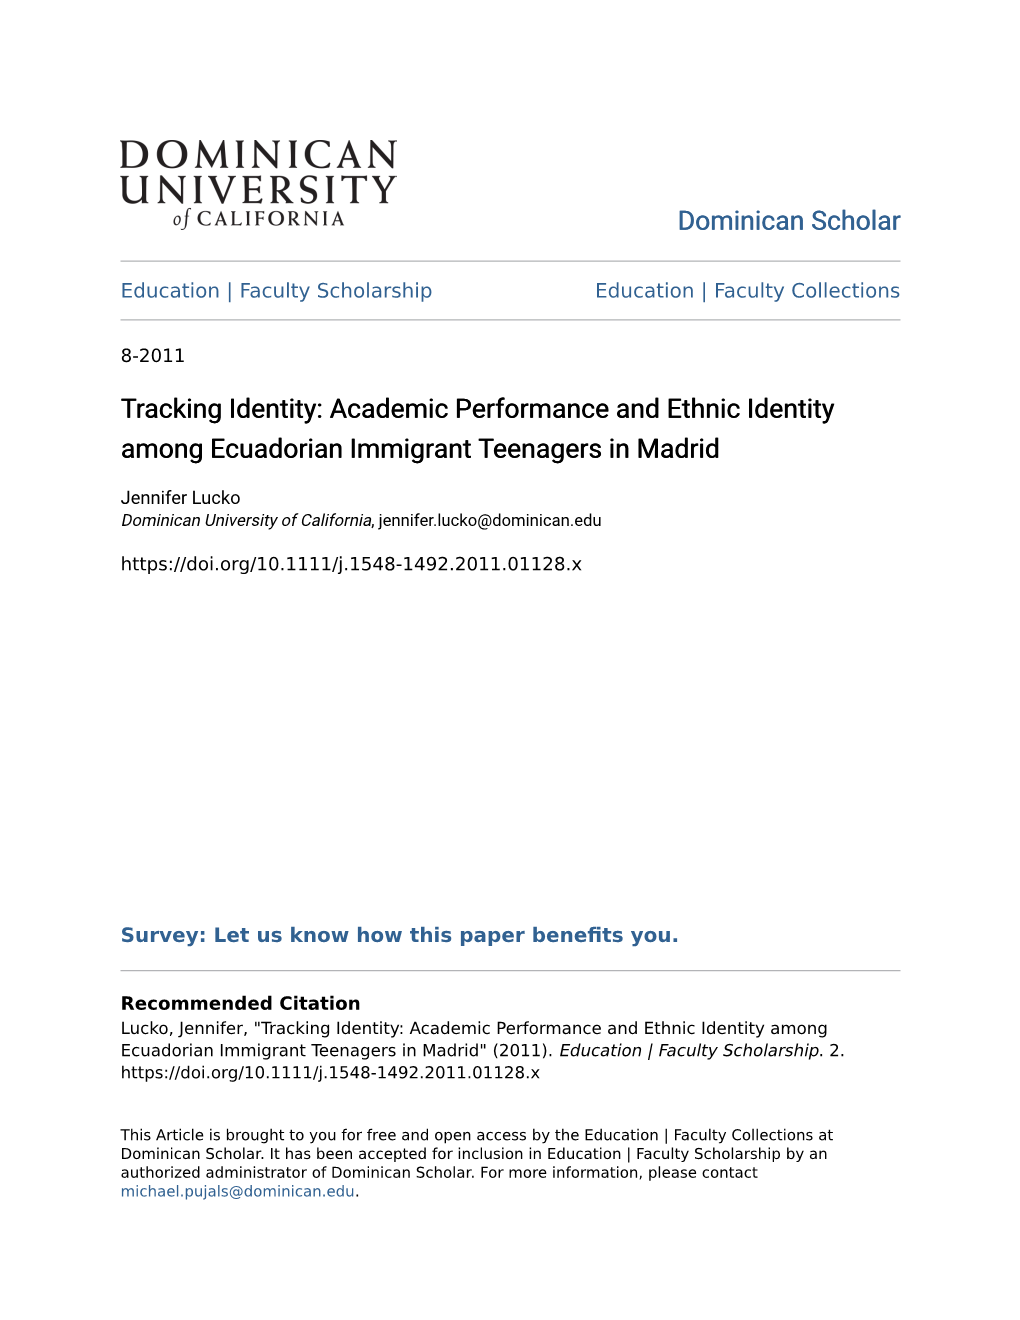 Academic Performance and Ethnic Identity Among Ecuadorian Immigrant Teenagers in Madrid